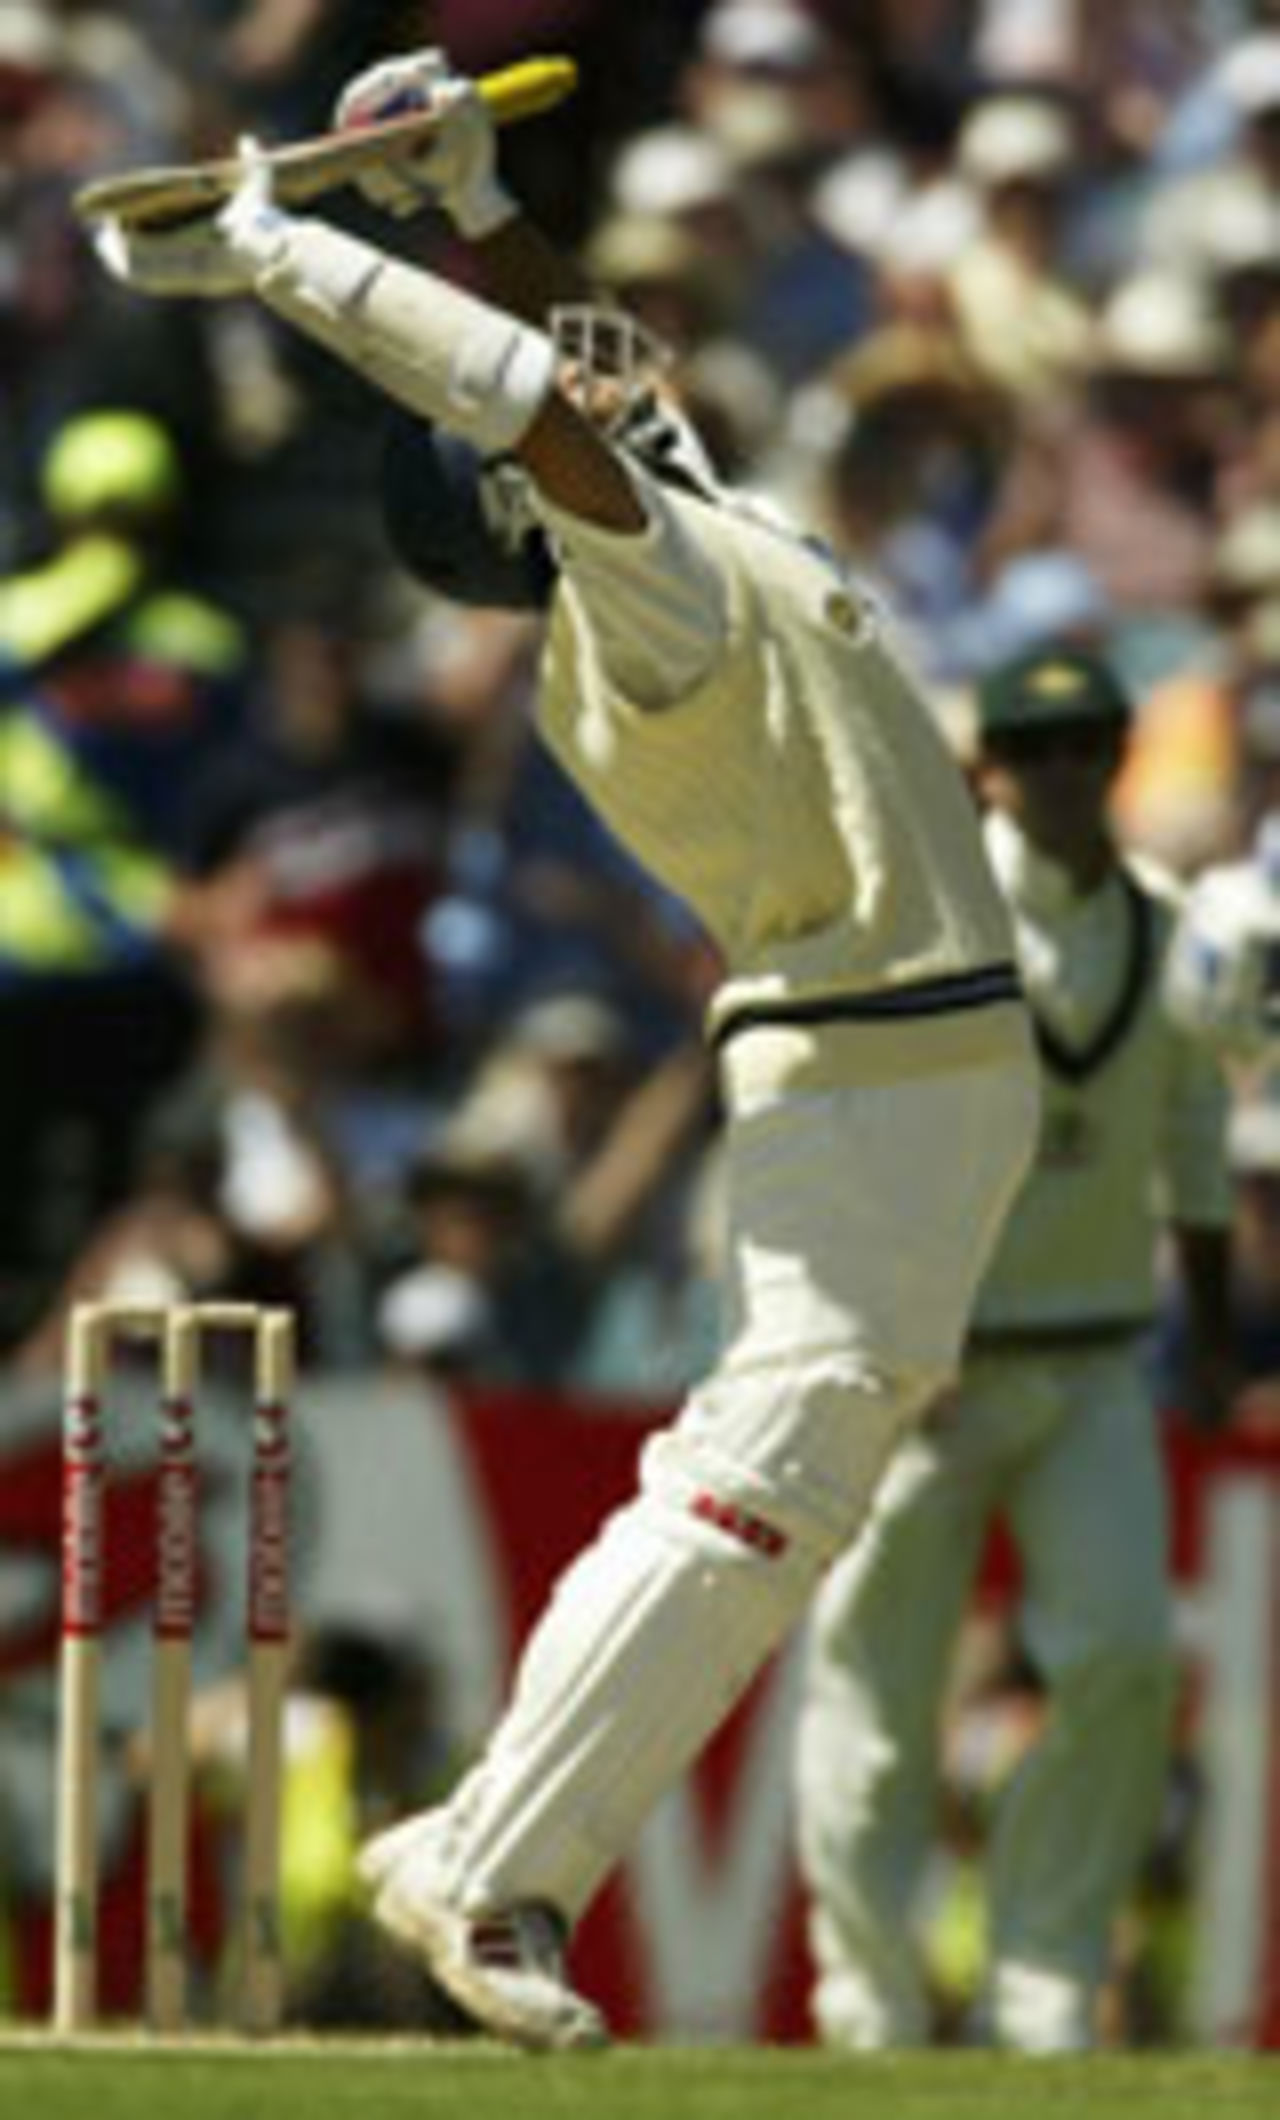 Sourav Ganguly is frustrated after getting out, Australia v India, 3rd Test, Melbourne, 2nd day, December 27, 2003